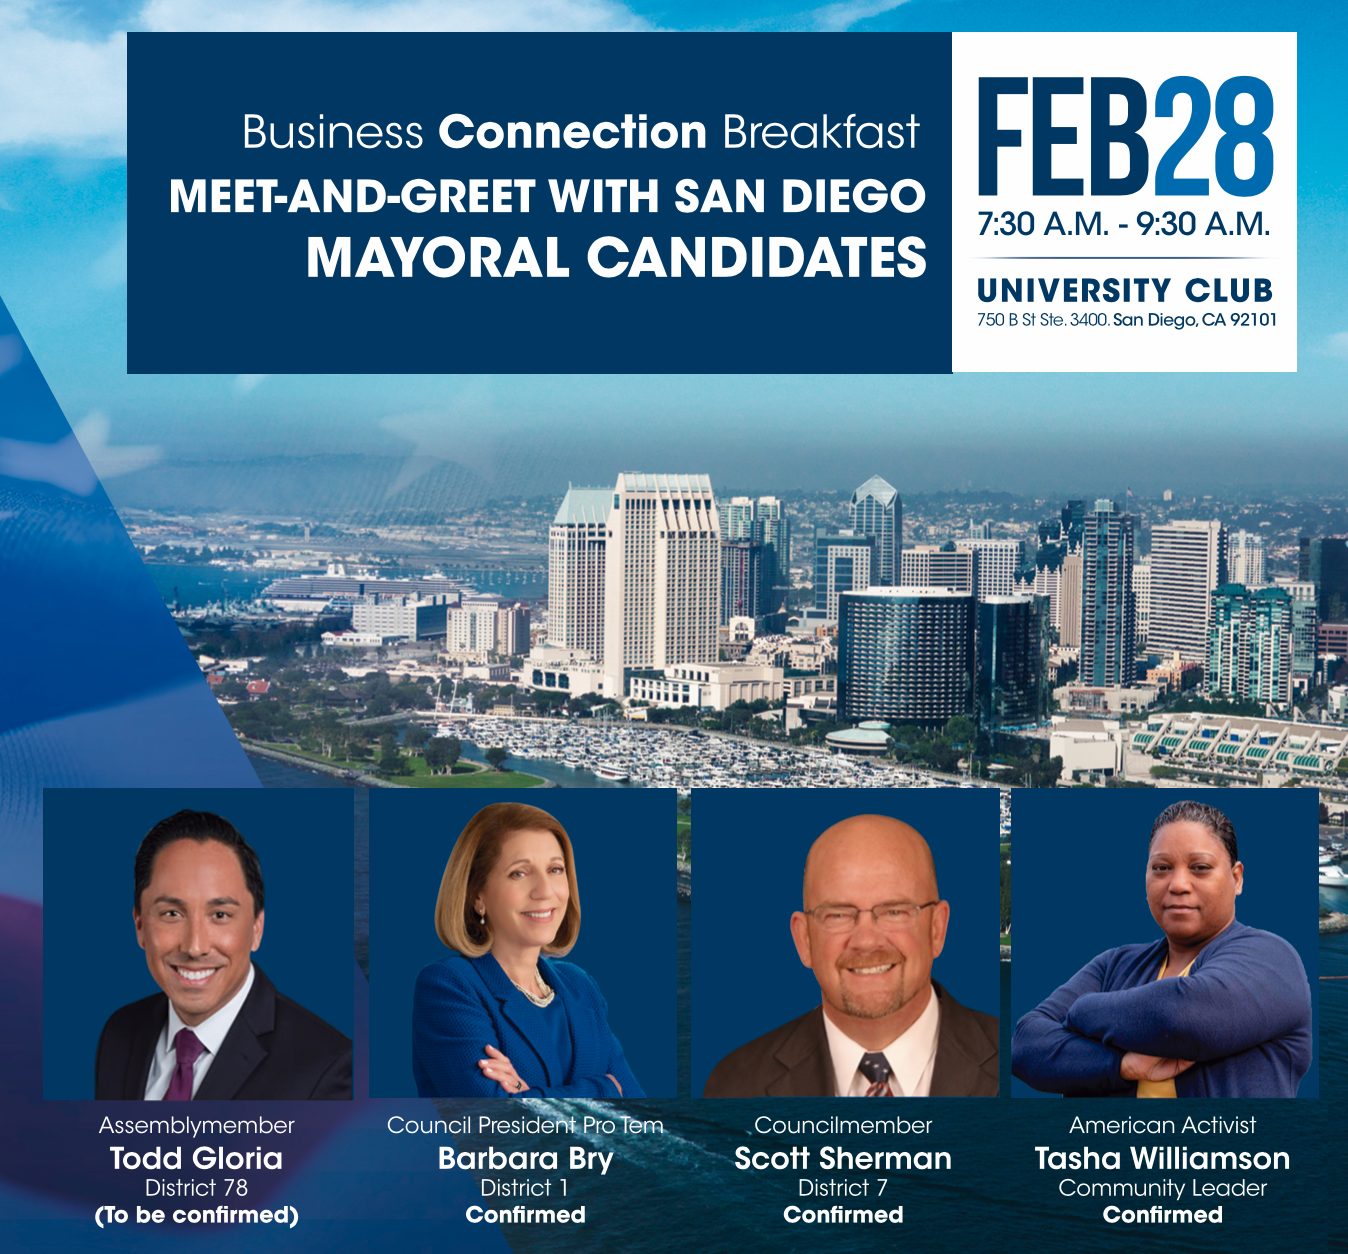 Meet and Greet with San Diego Mayoral Candidates